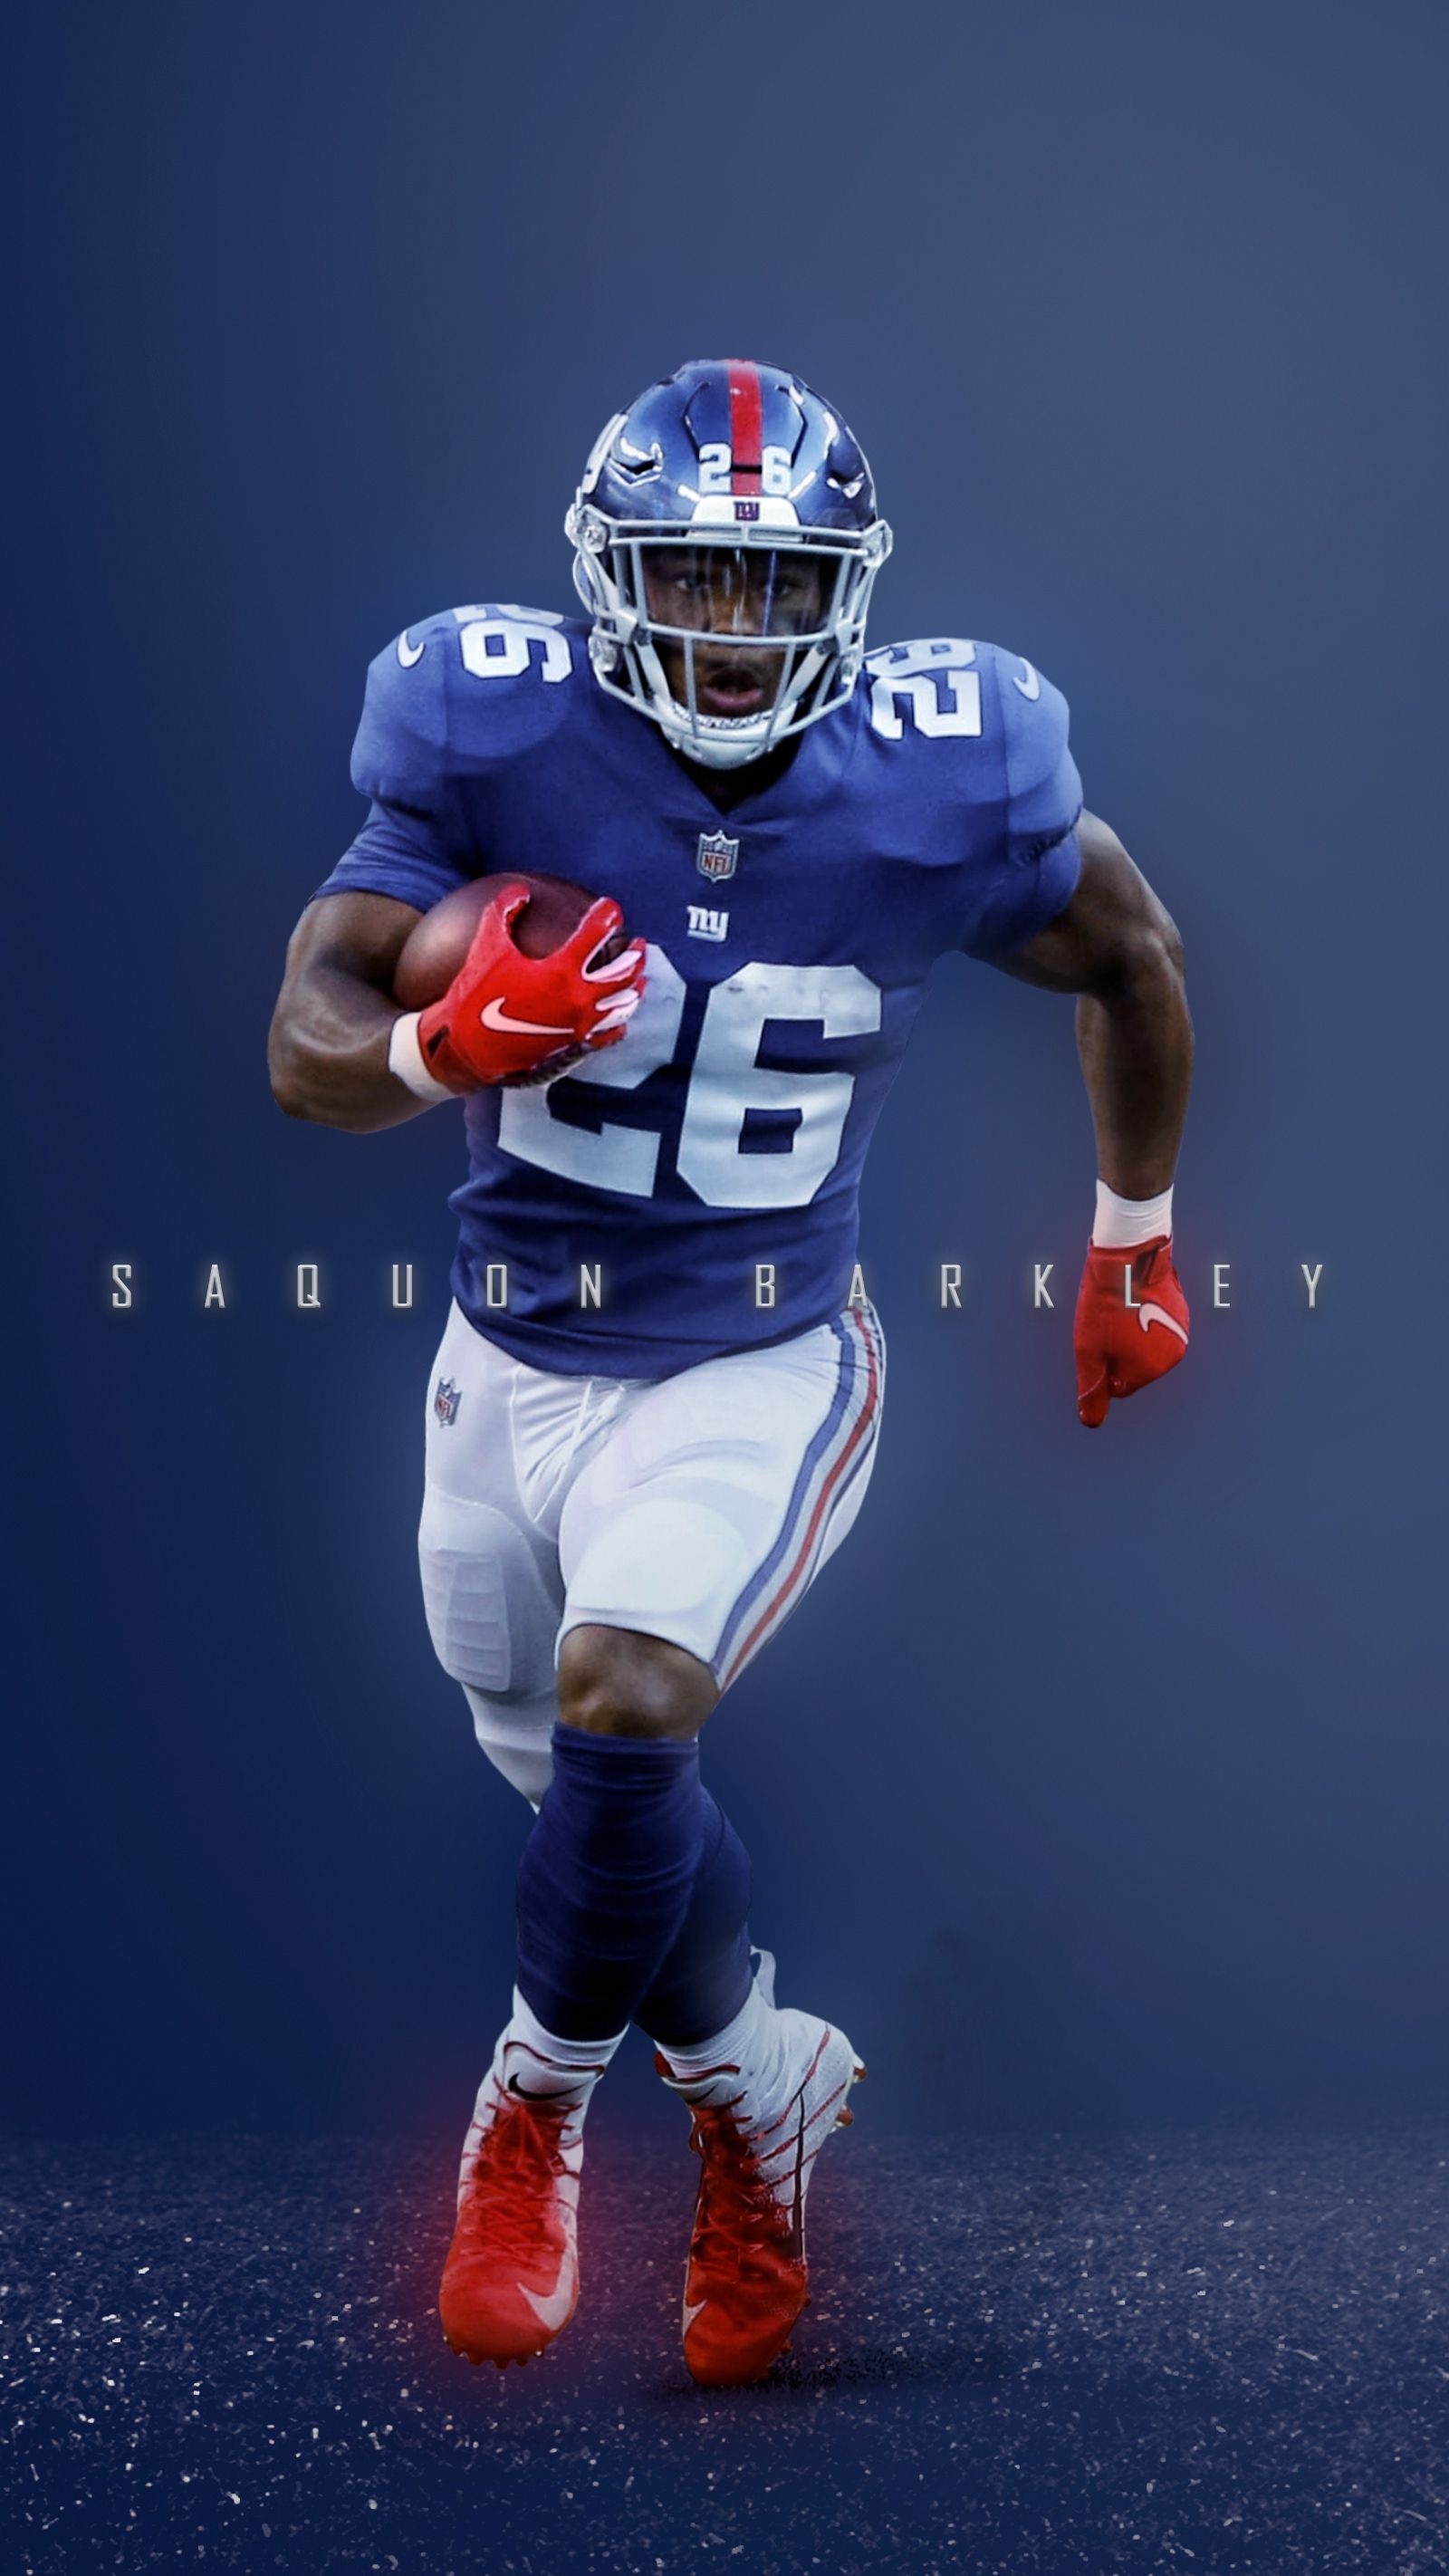 American Football: NFL, Saquon Barkley, The most popular sport in the United States. 1600x2850 HD Background.